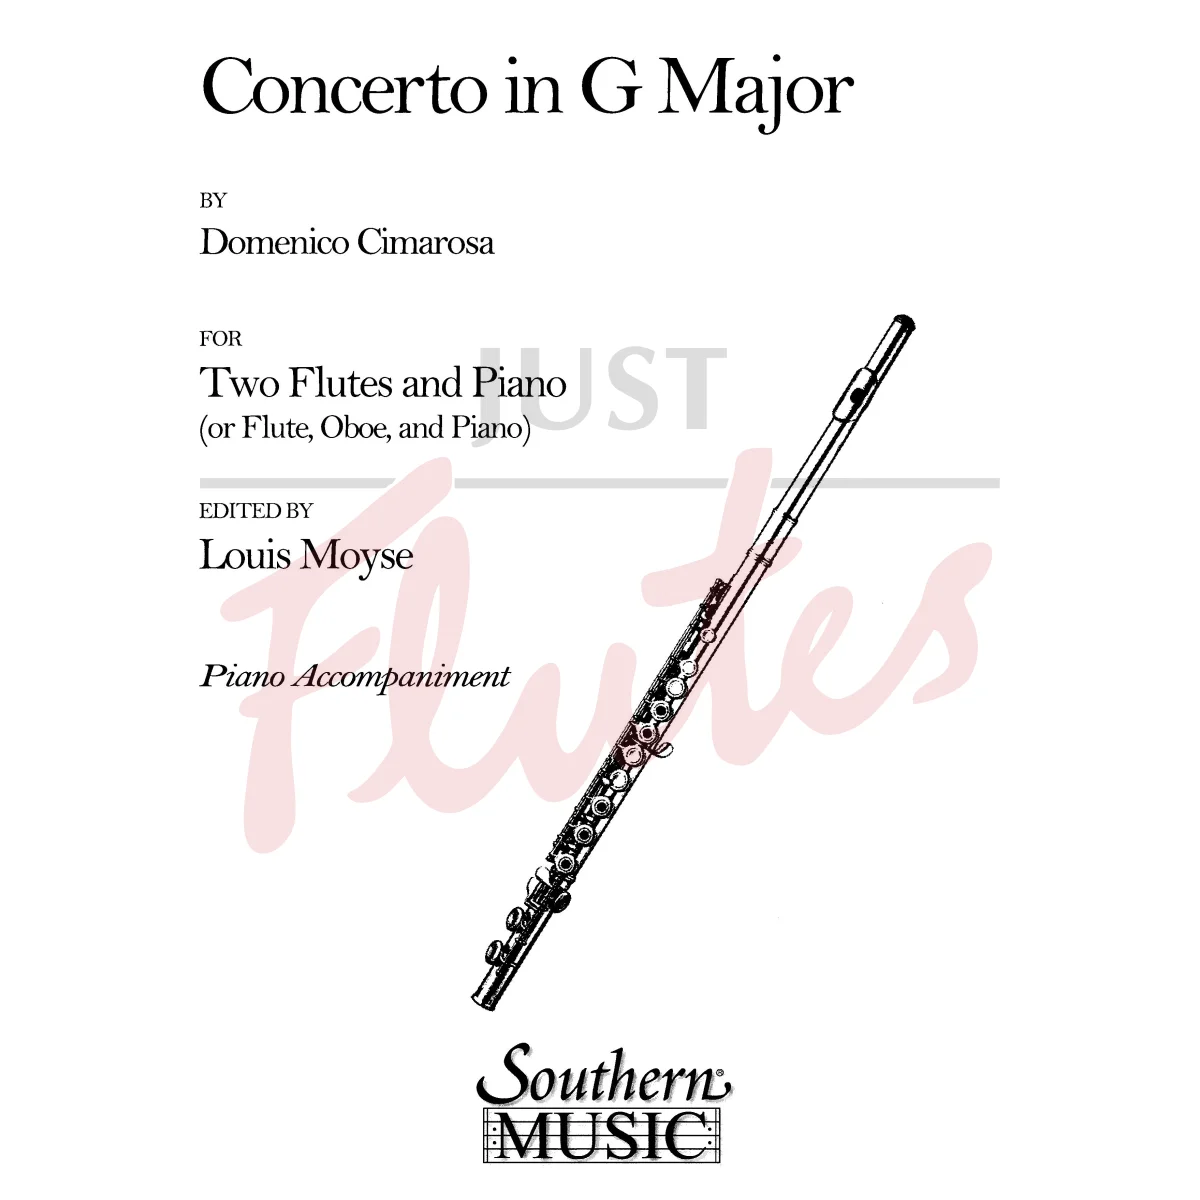 Concerto in G major for Two Flutes and Piano - Piano Accompaniment Part